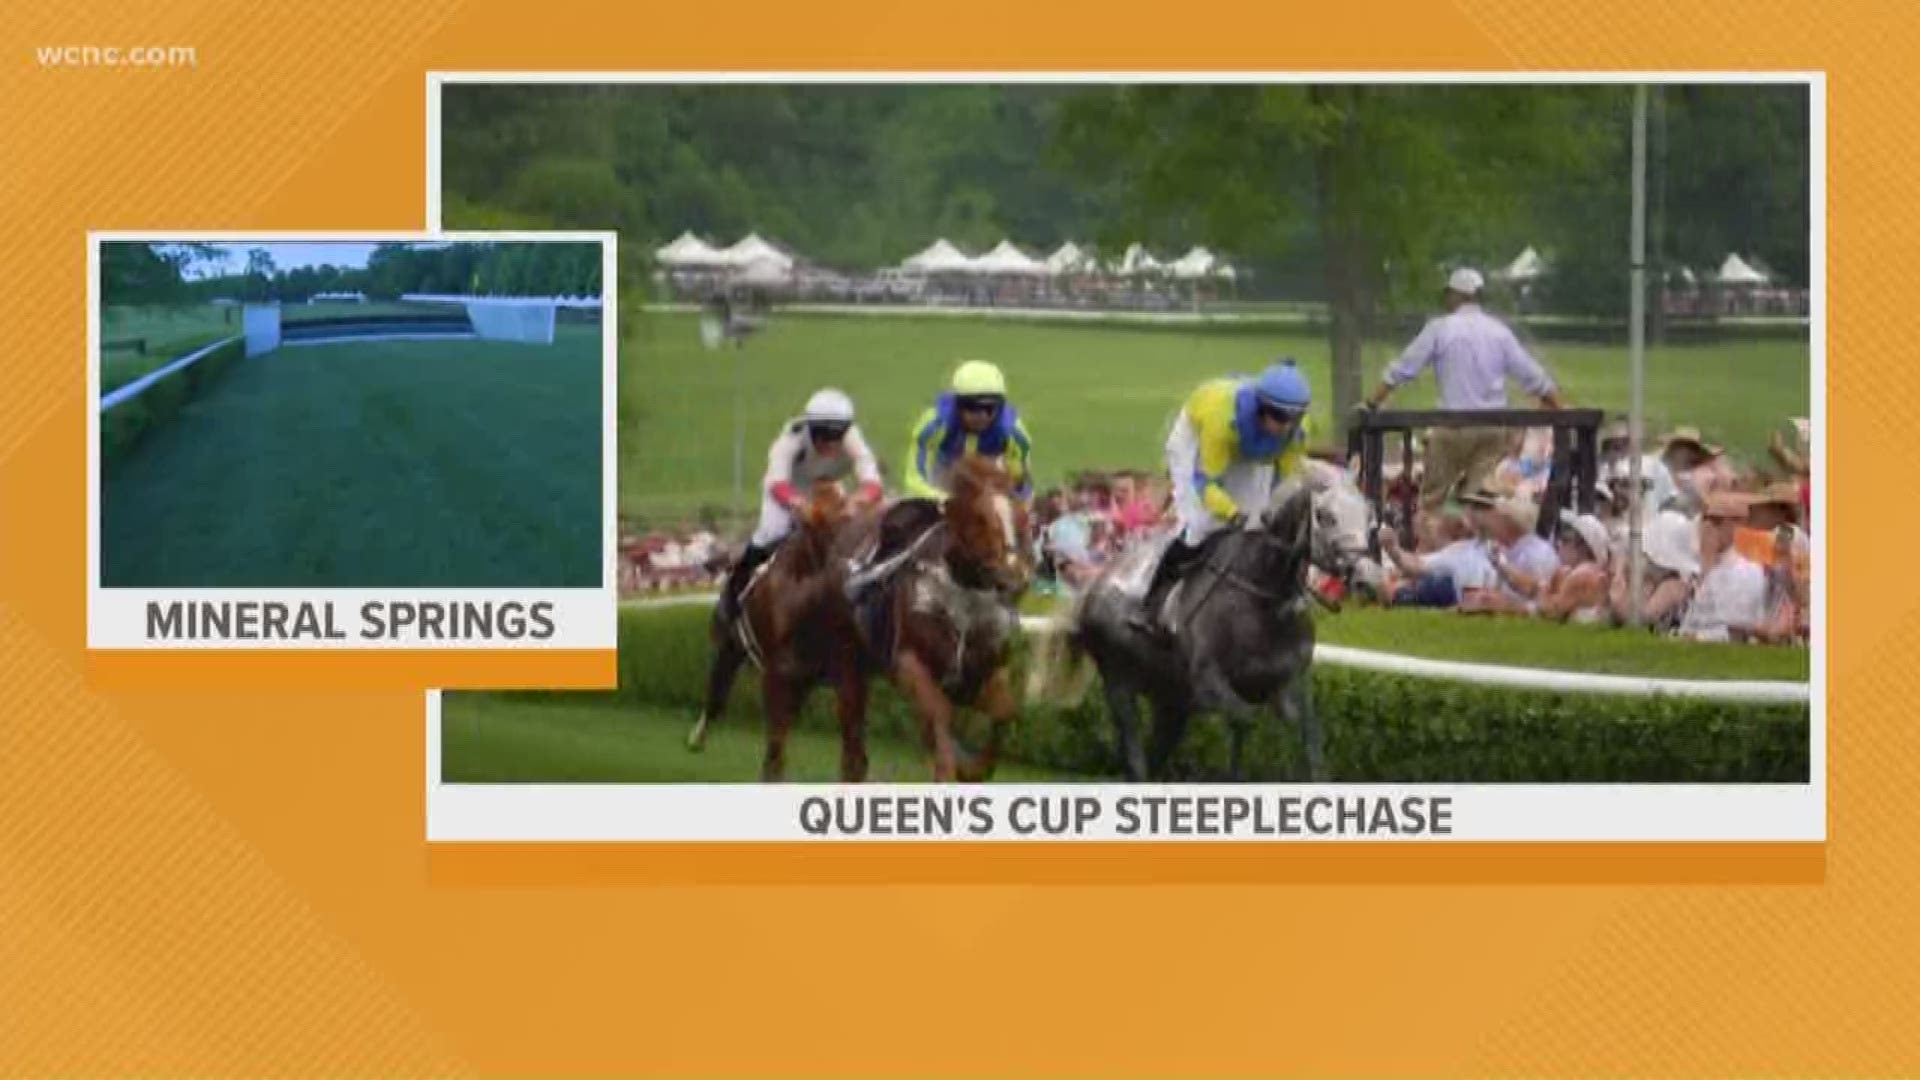 Move over, Kentucky Derby. It's time for the Queen's Cup Steeplechase!